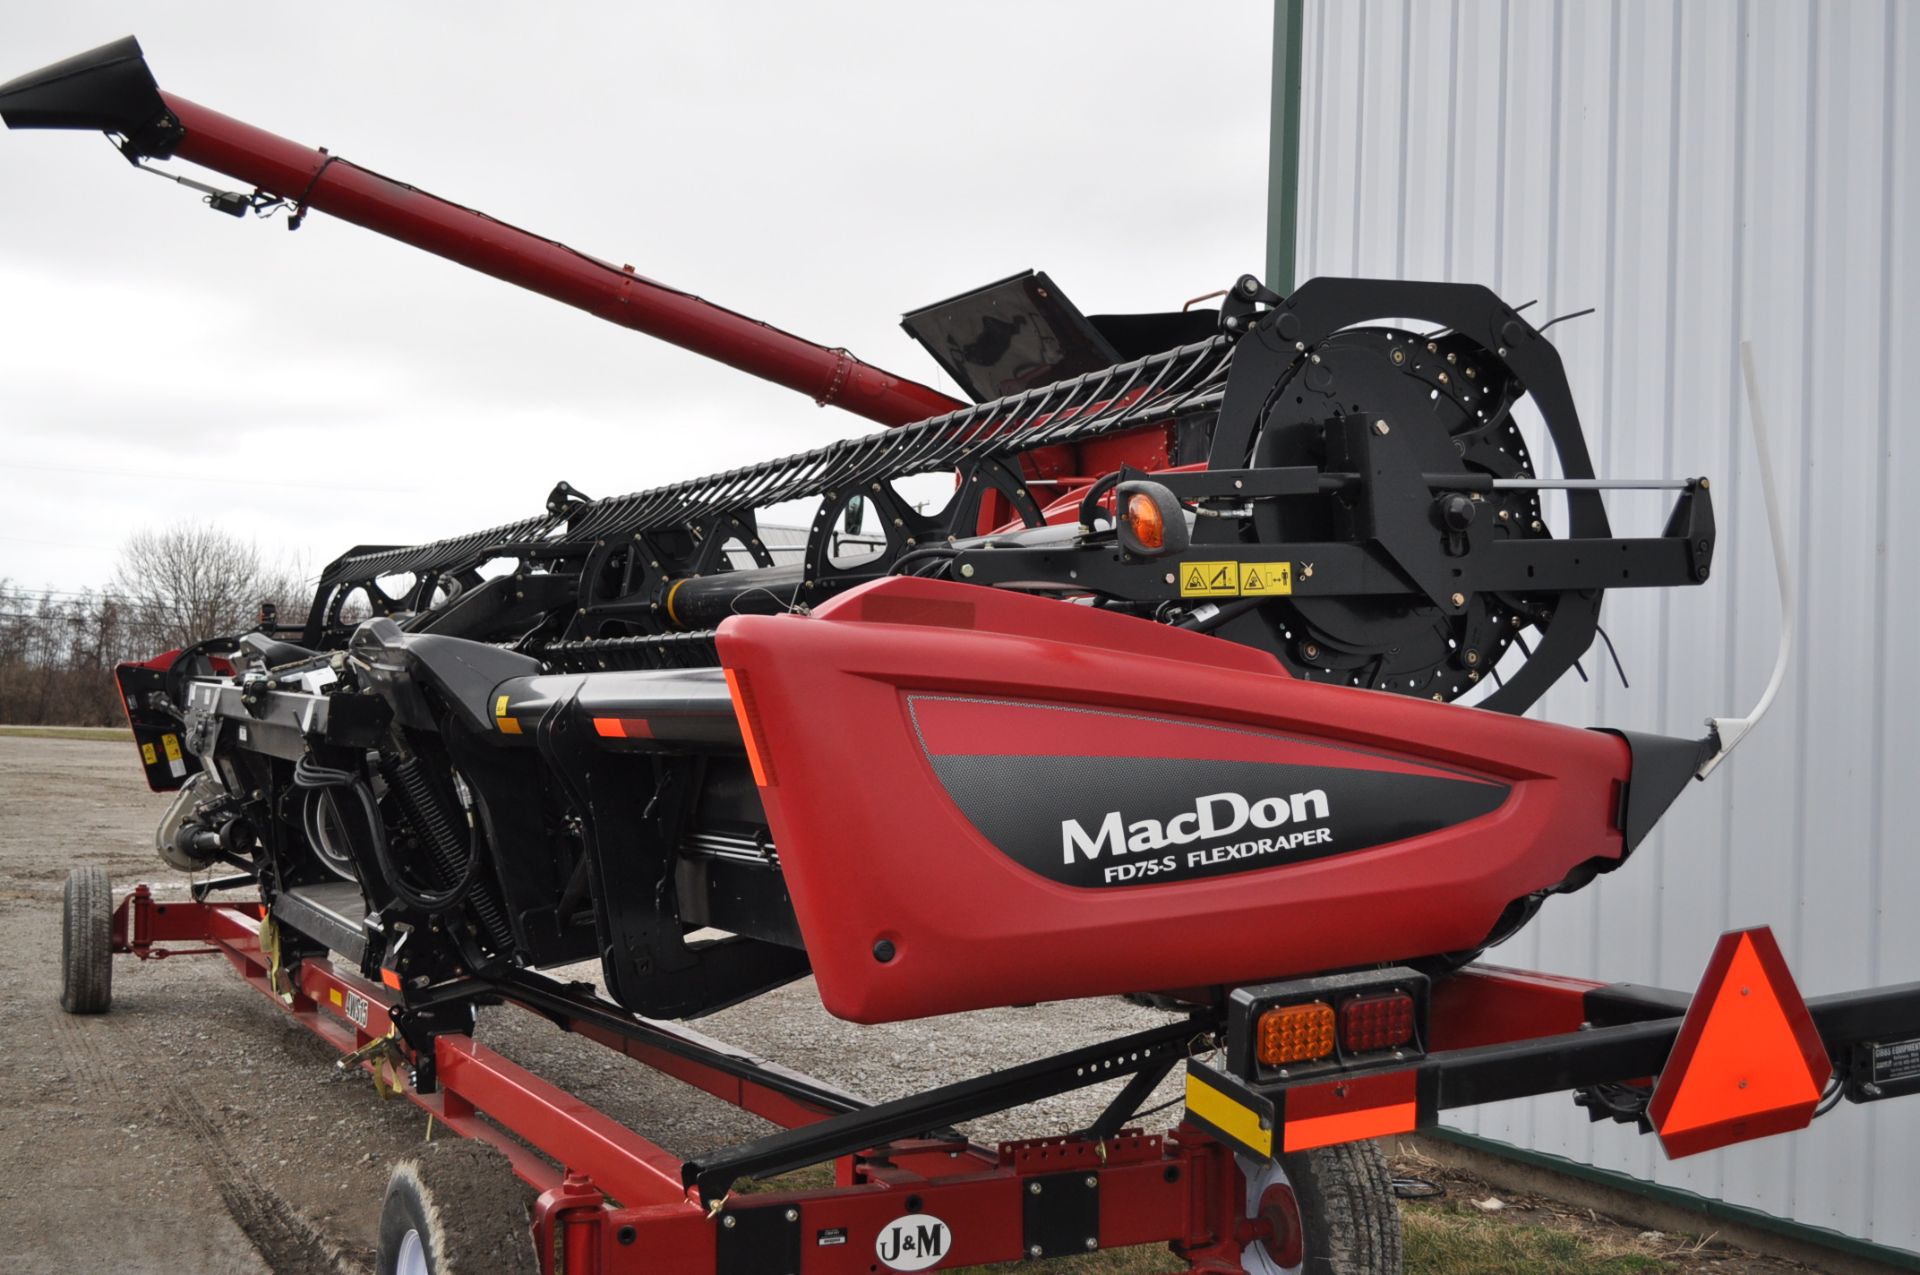 MacDon FD 75 S Flex Draper grain table 35’ single point hook up, one owner less than 1600 acres, - Image 3 of 14